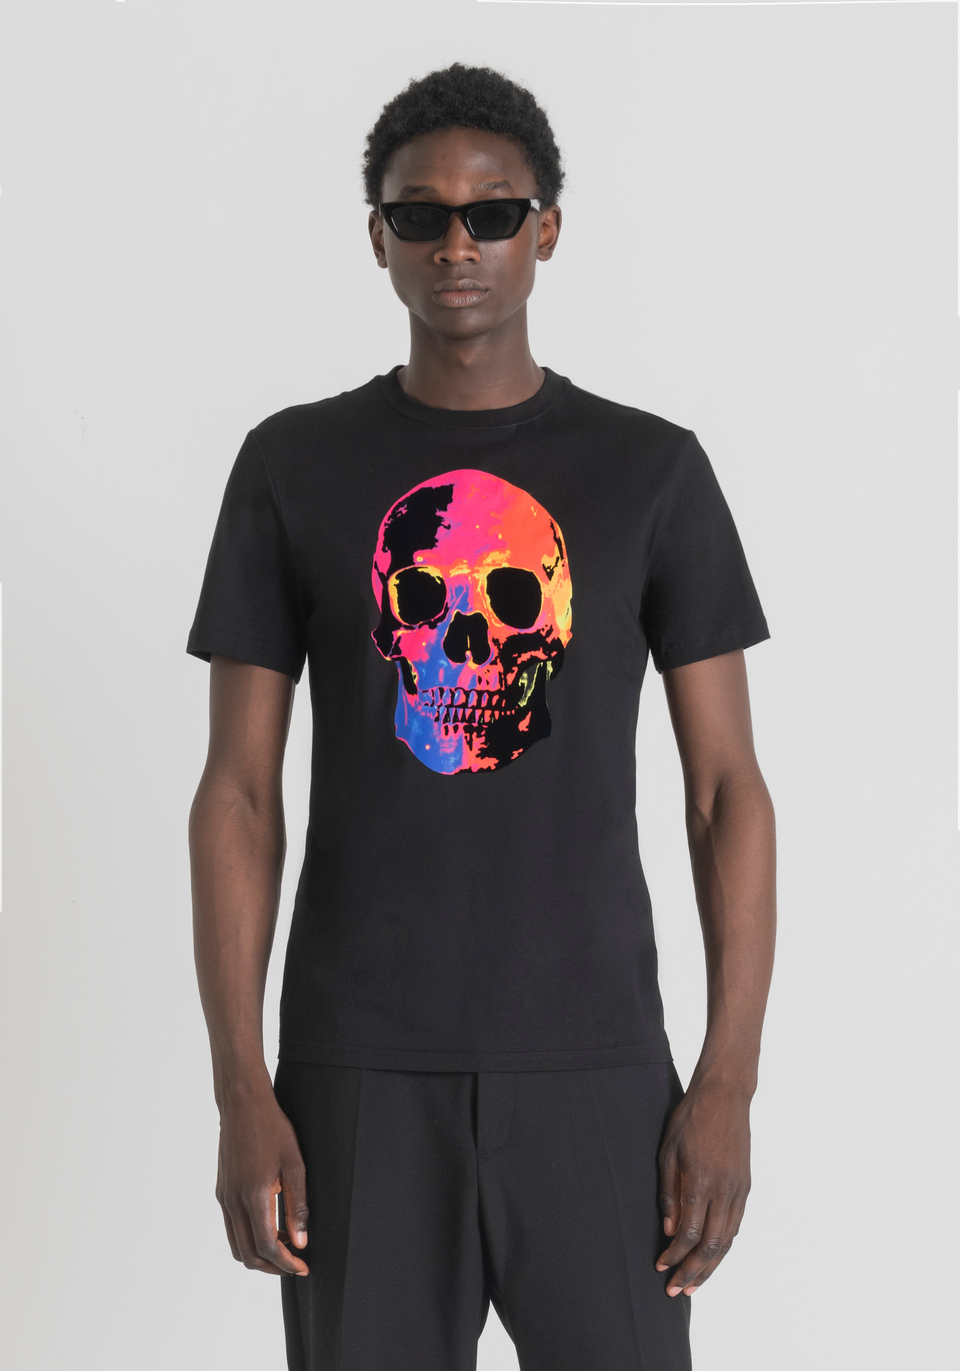 SLIM-FIT T-SHIRT IN SOFT 100% COTTON WITH SKULL PRINT - Antony Morato Online Shop